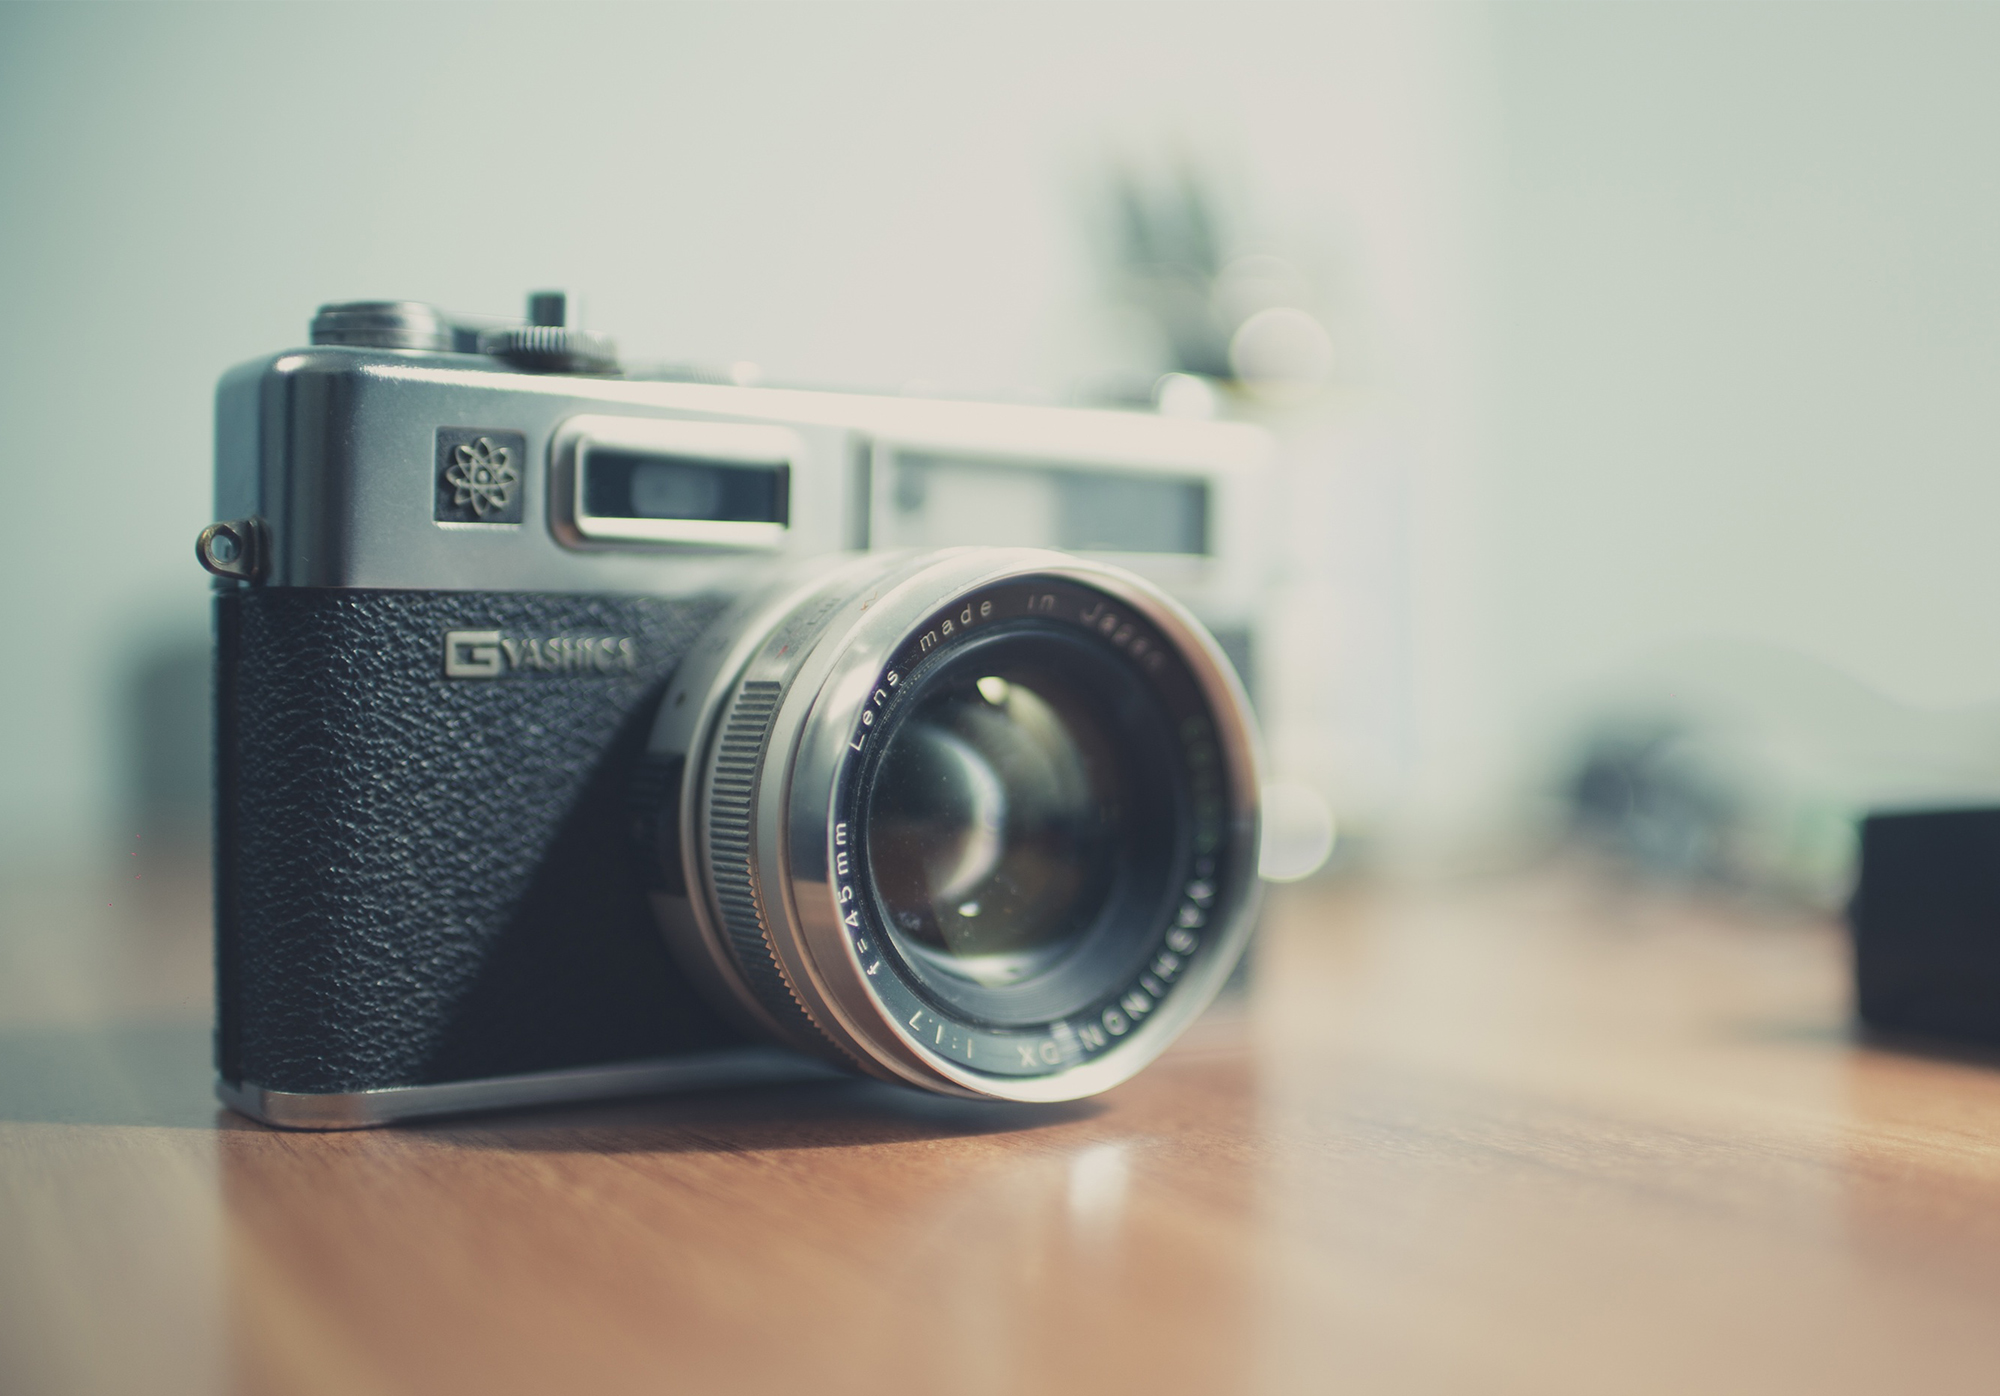 The Ultimate List of Free Stock Photo Resources